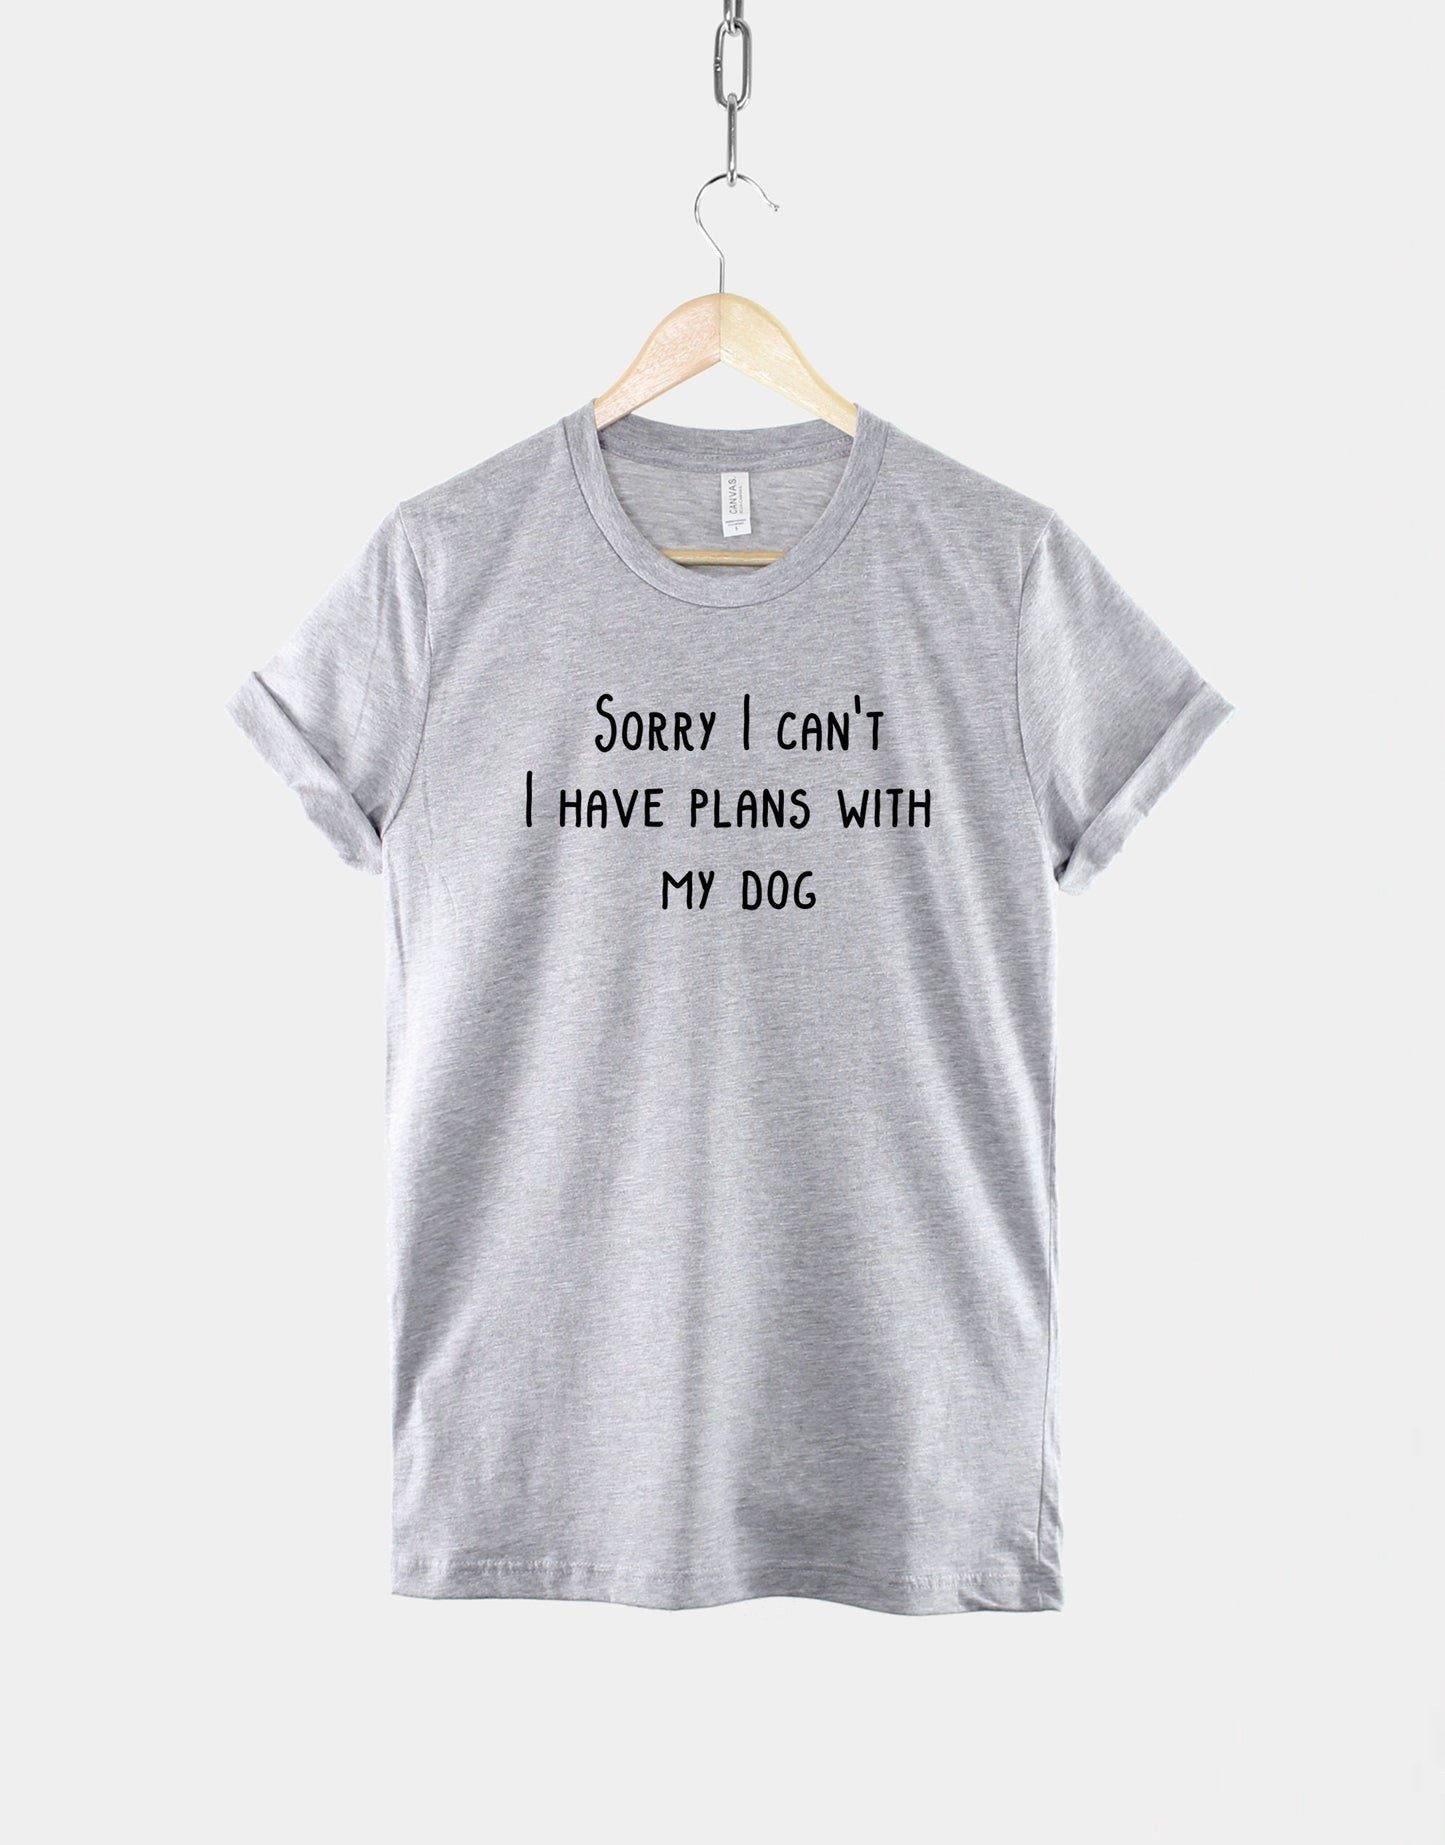 I Have Plans With My Dog T-Shirt - Sorry I Can't I Have Plans With My Dog Shirt - Dog Owner TShirt